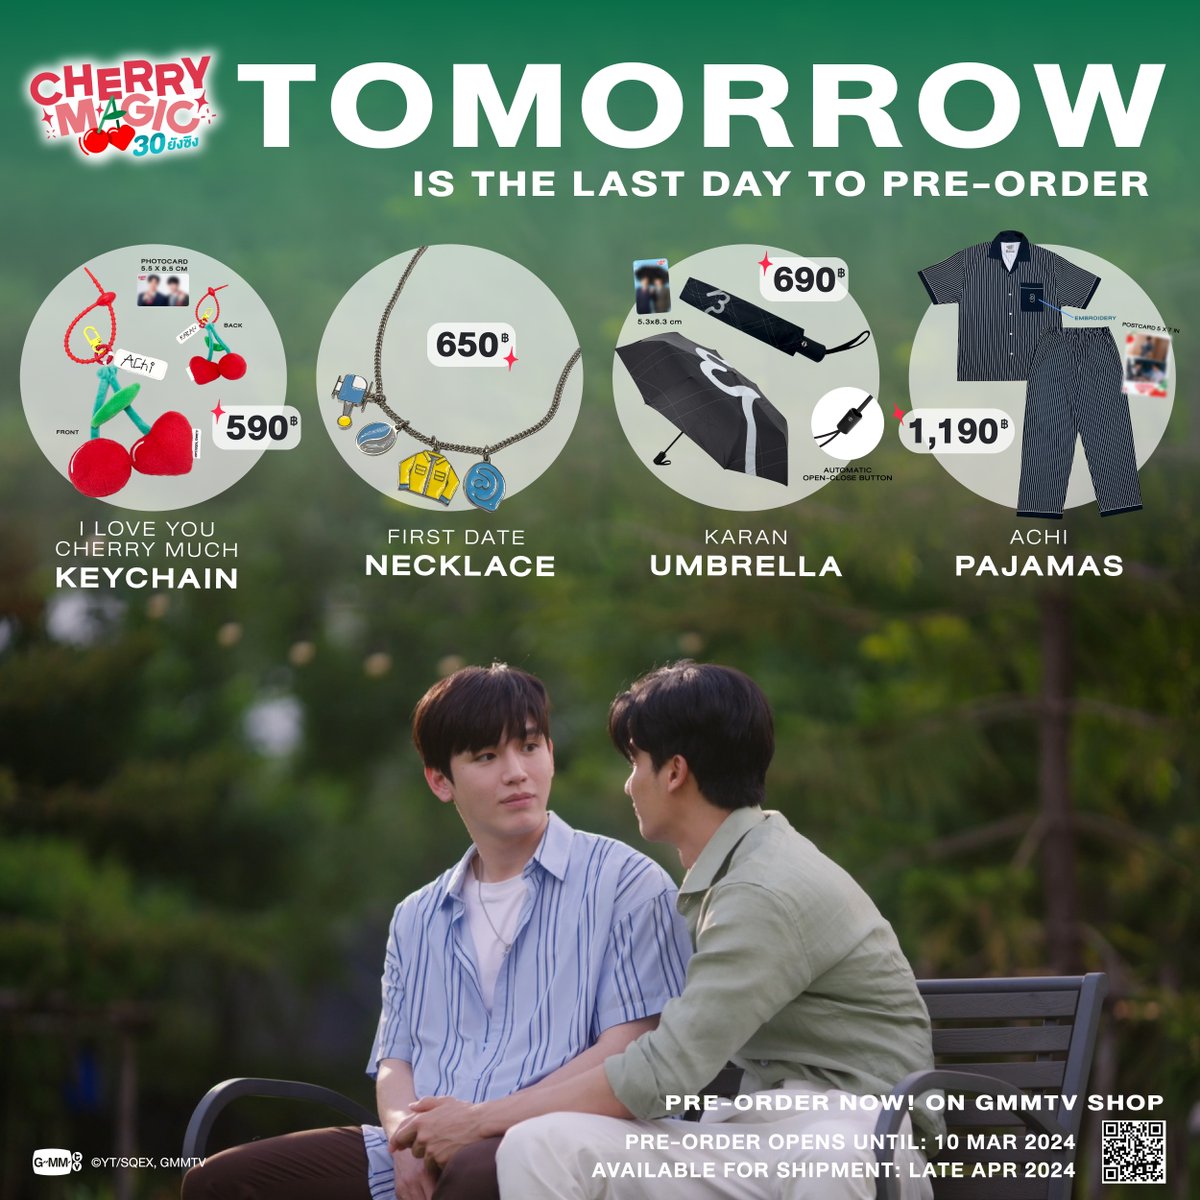 Tomorrow is your last chance to pre-order the CHERRY MAGIC official merchandise, guys. shorturl.at/nqJS5 #CherryMagicTH #GMMTV